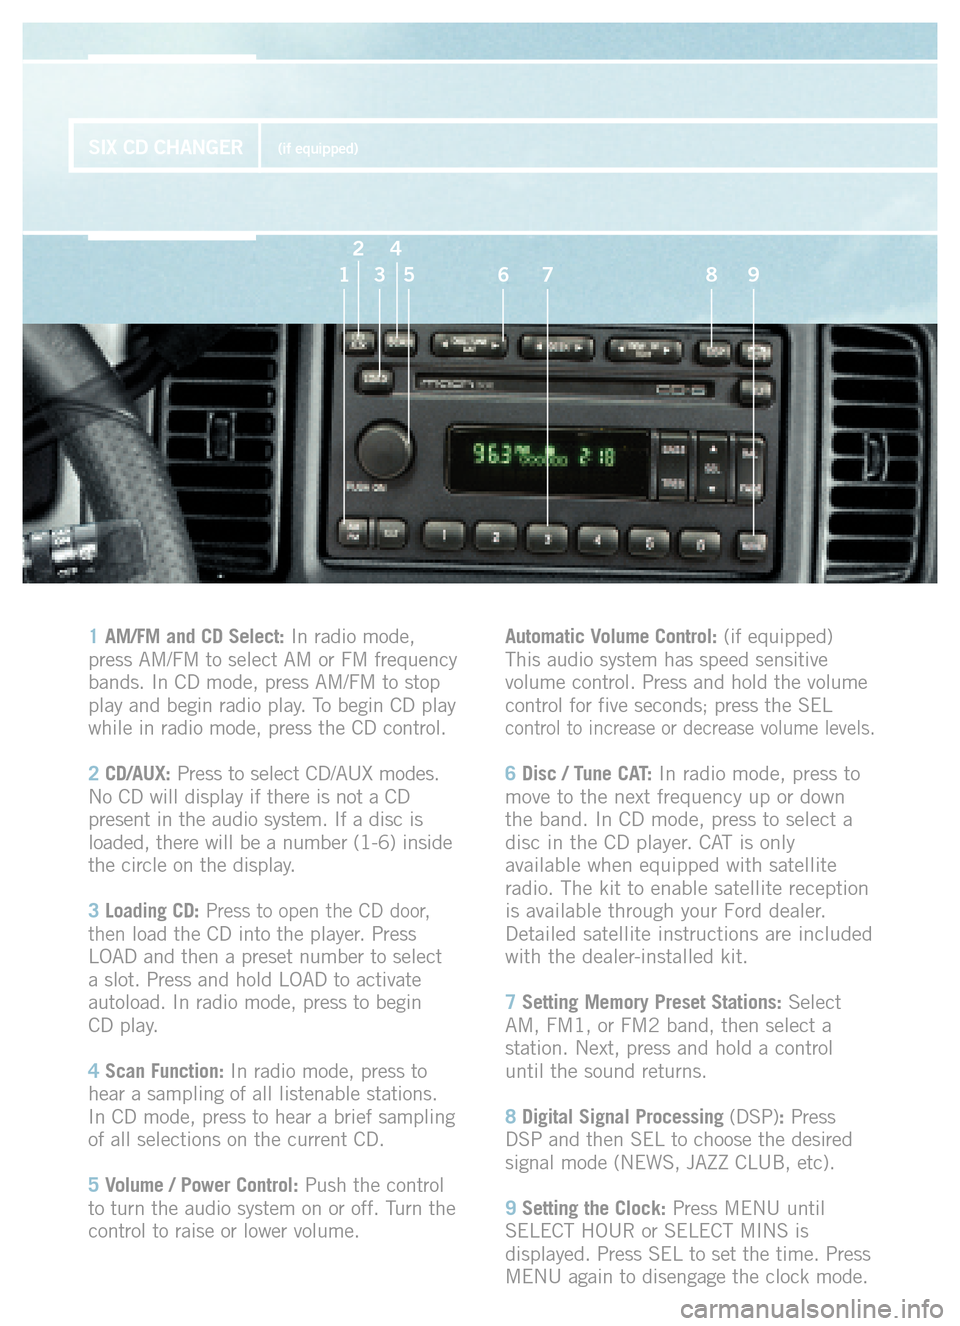 FORD ESCAPE HYBRID 2005 2.G Quick Reference Guide 1 AM/FM and CD Select:In radio mode,
press AM/FM to select AM or FM frequency
bands. In CD mode, press AM/FM to stop
play and begin radio play. To begin CD play
while in radio mode, press the CD contr